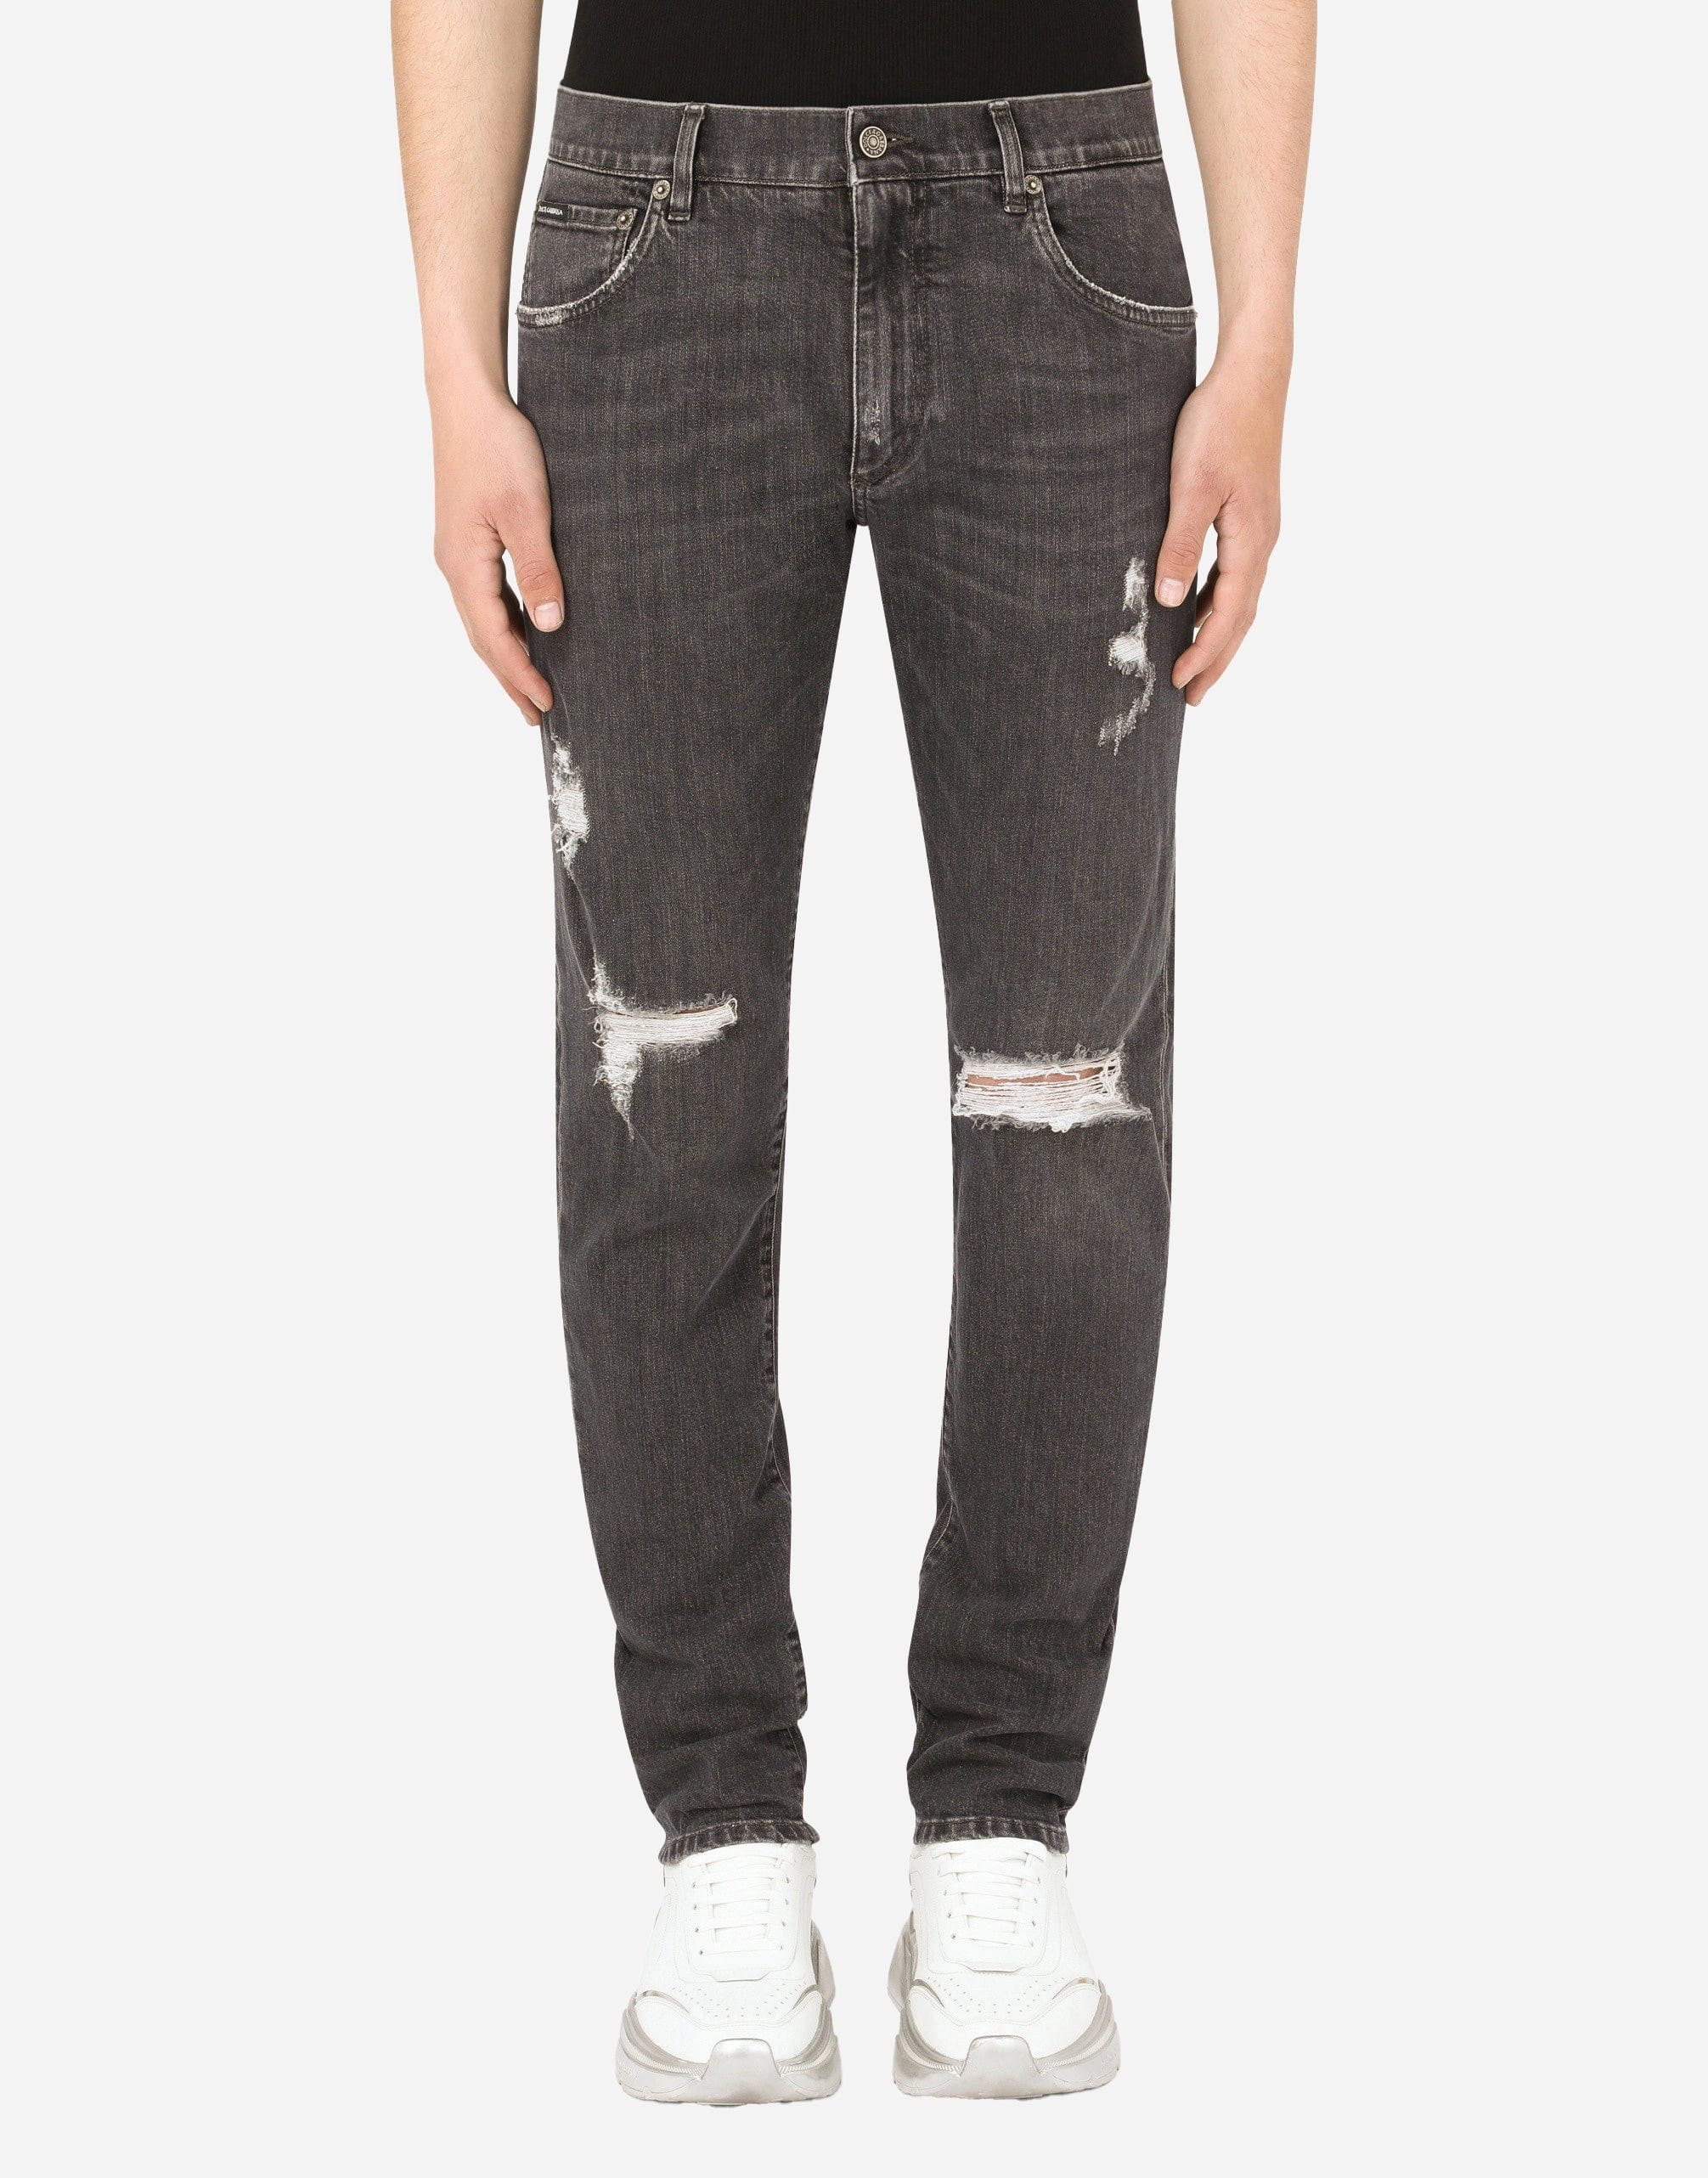 Slim-Fit Cotton Jeans With Rips